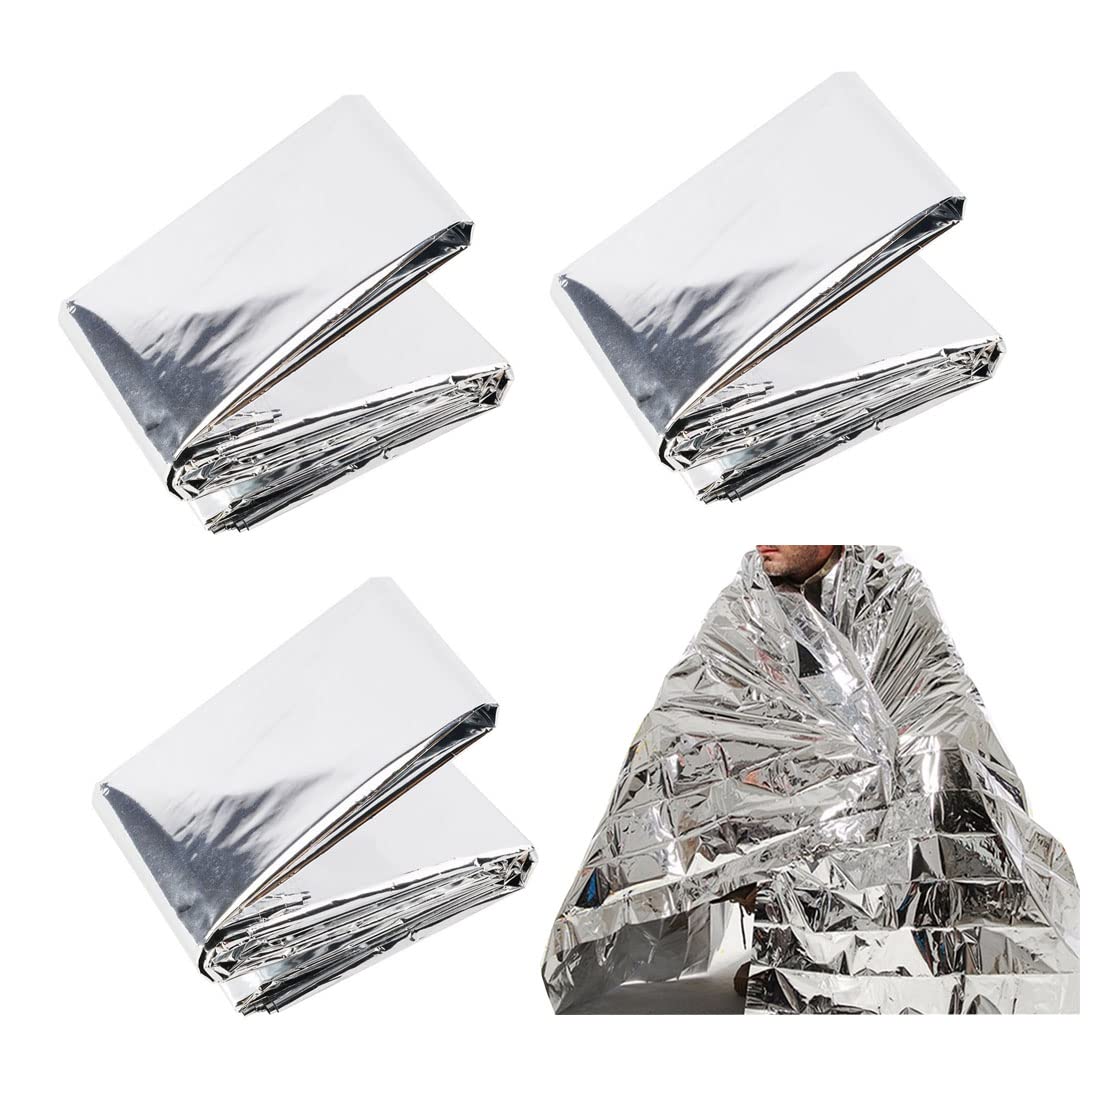 Emergency Thermal Blankets Set, Waterproof Emergency Foil Blankets, Survival Reflective Thermal First Aid Foil Blankets for Outdoors, Camping, Hiking, Marathons, First Aid